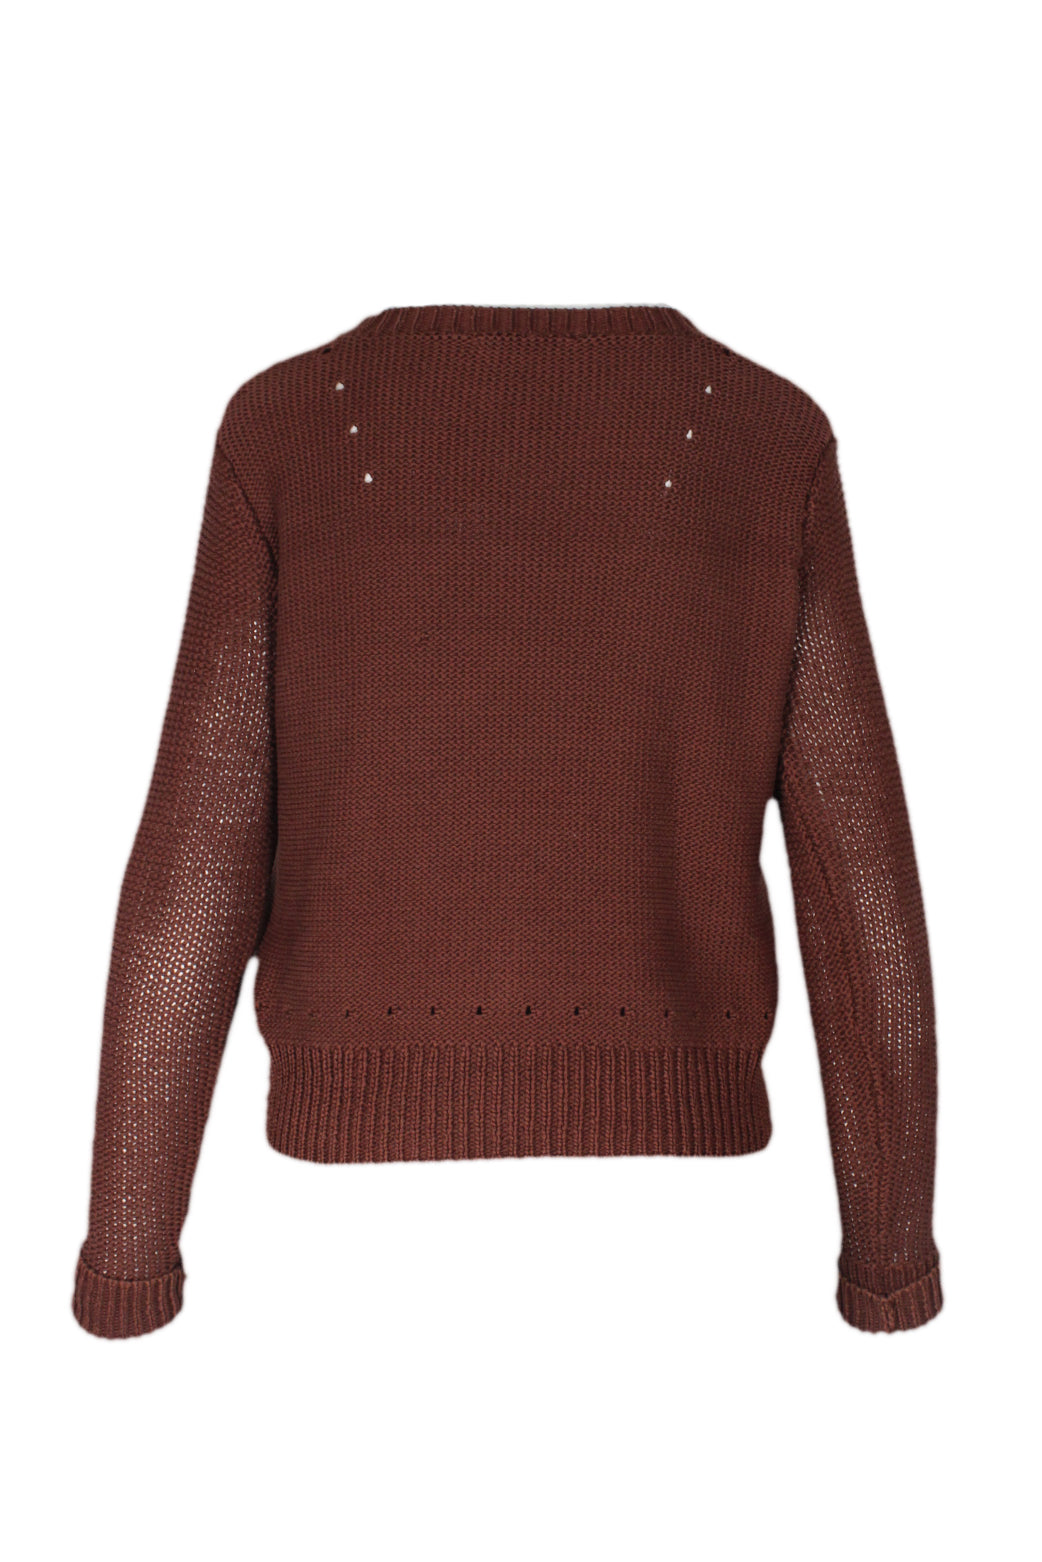 back view of alexander wang brown long sleeve sweater. features crew neckline, ribbed trim, and pull on style; relaxed fit.  detail row of holes near ribbed hem near hip. 